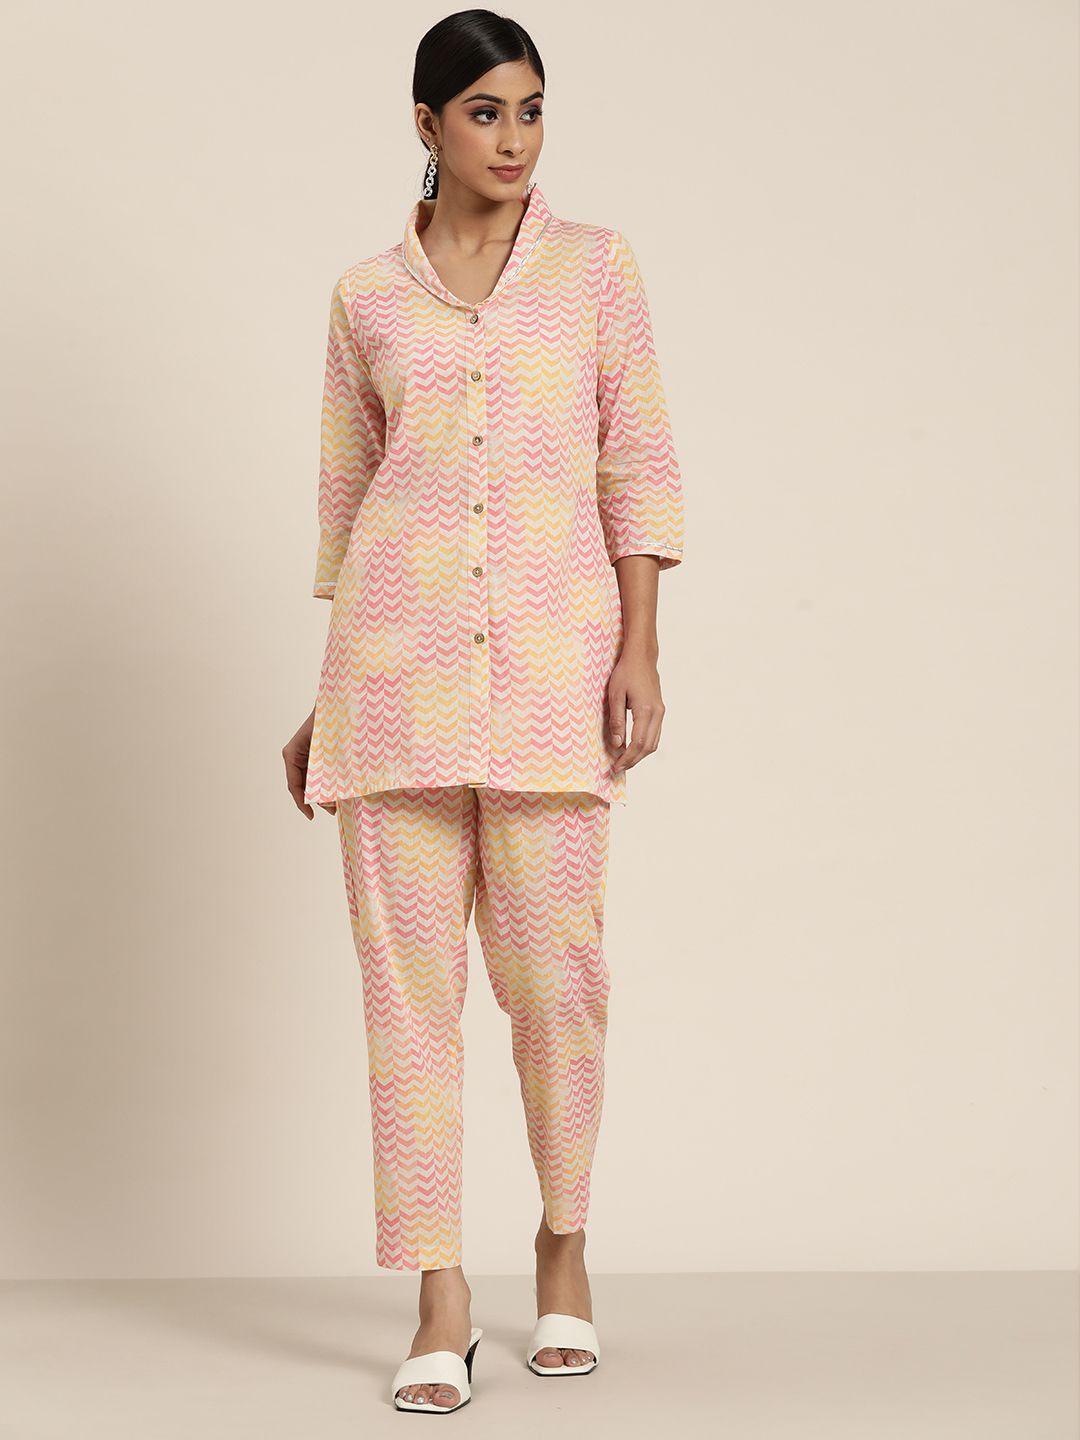 shae by sassafras pink & beige printed sustainable shirt with straight trousers